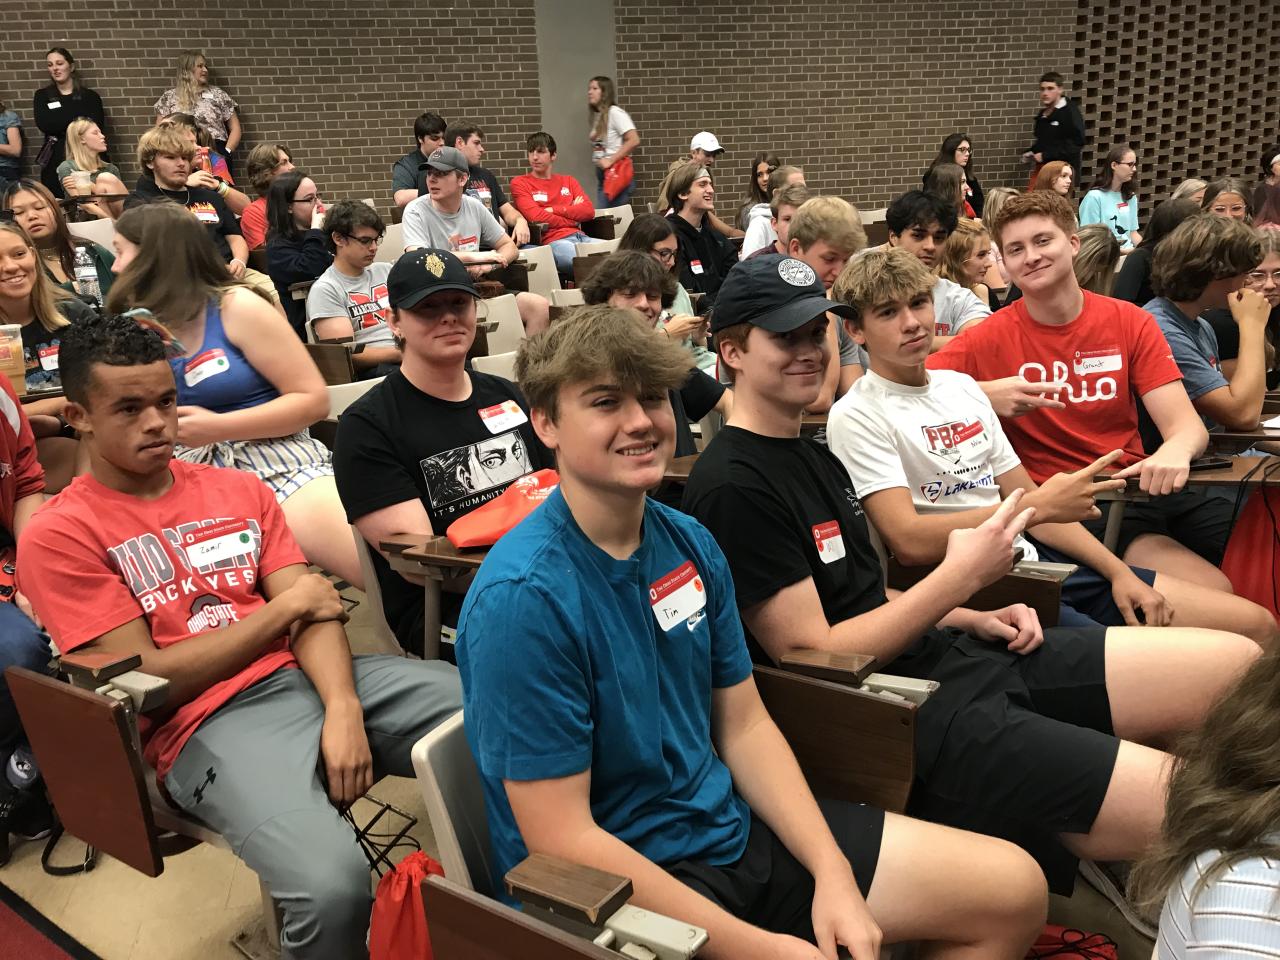 Male students seated in auditorium